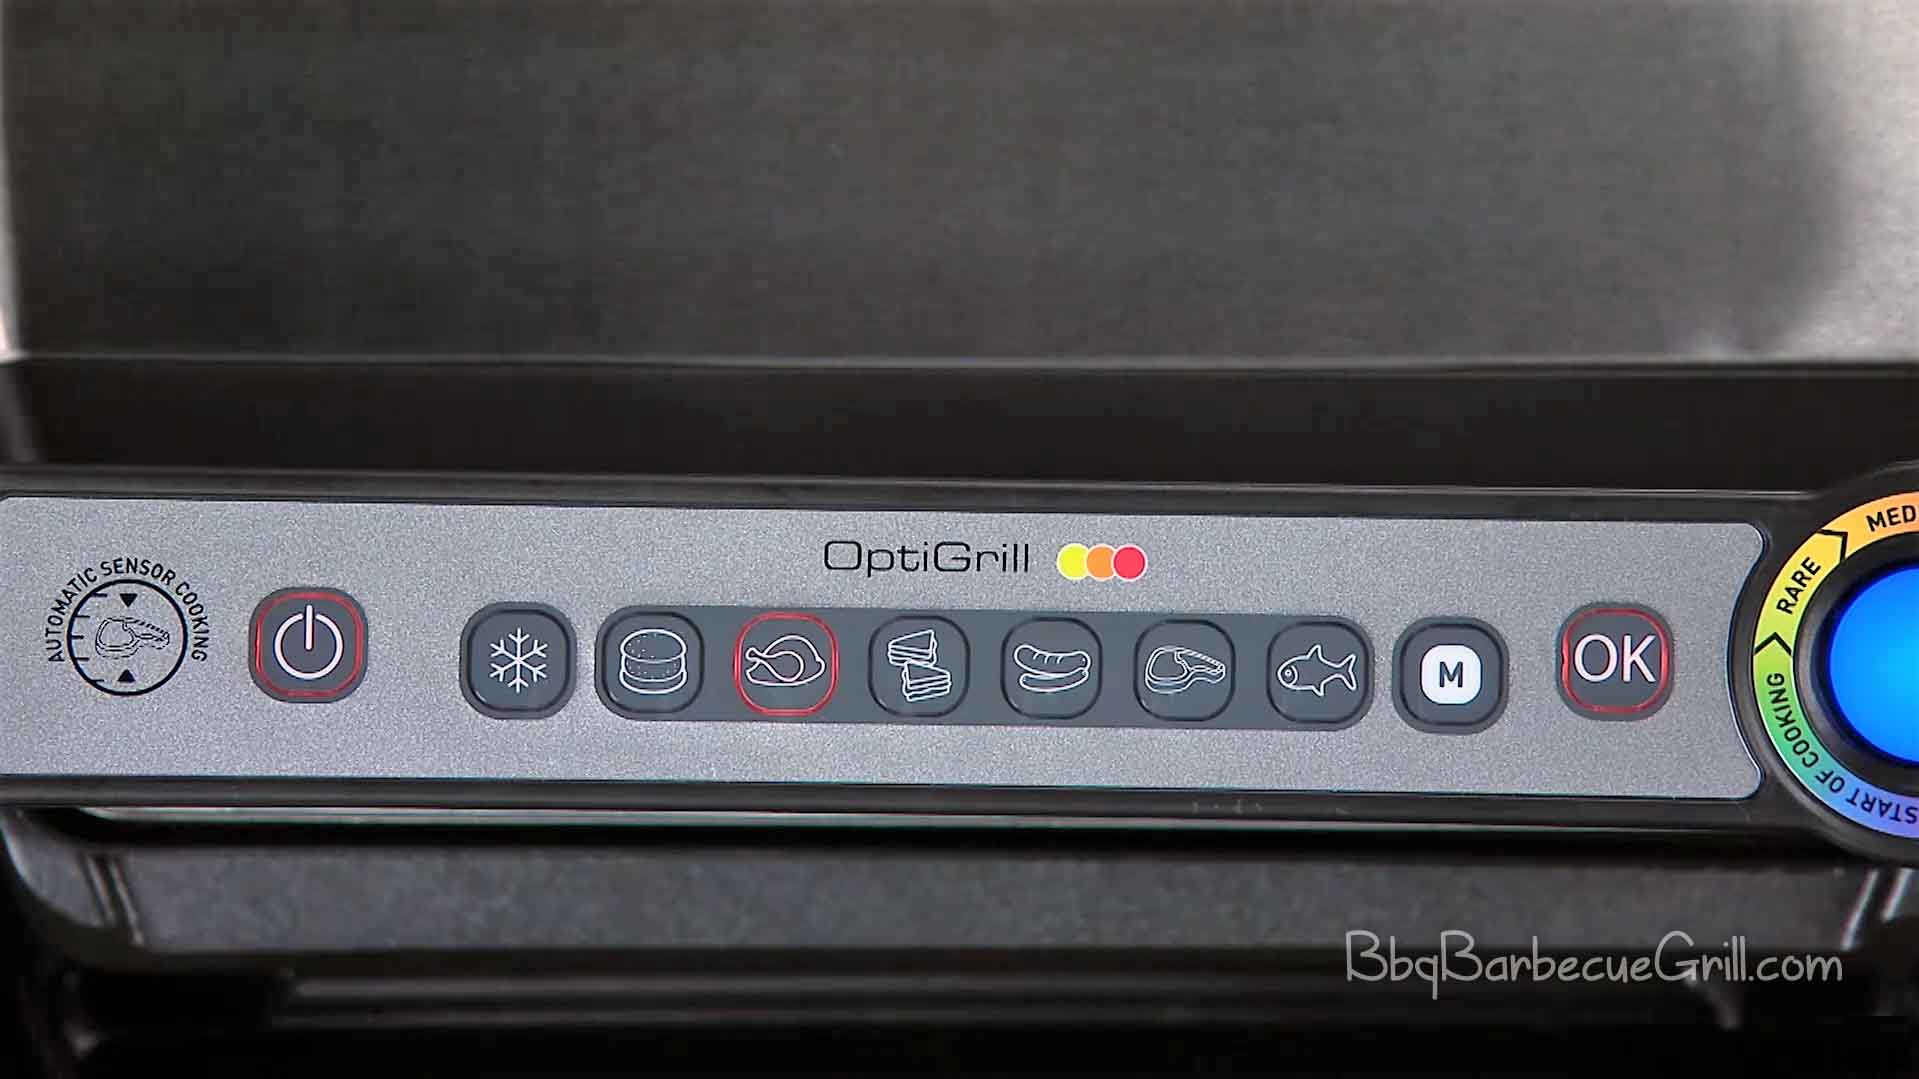 T-fal GC702 OptiGrill Stainless Steel Indoor Electric Grill